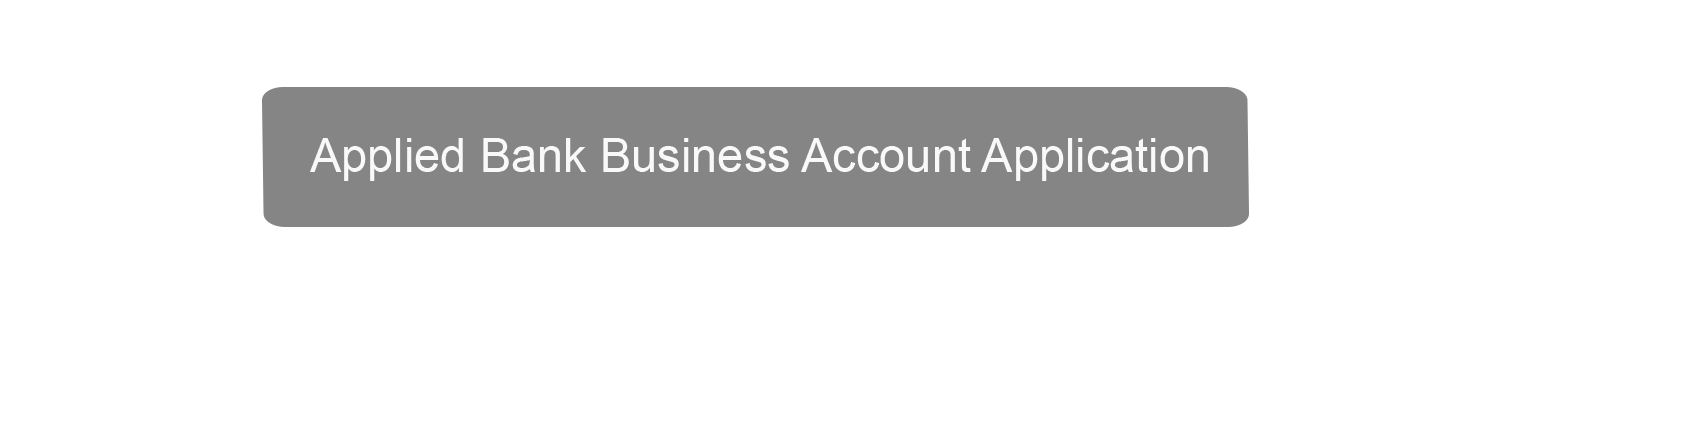 Applied Bank Business Account Application